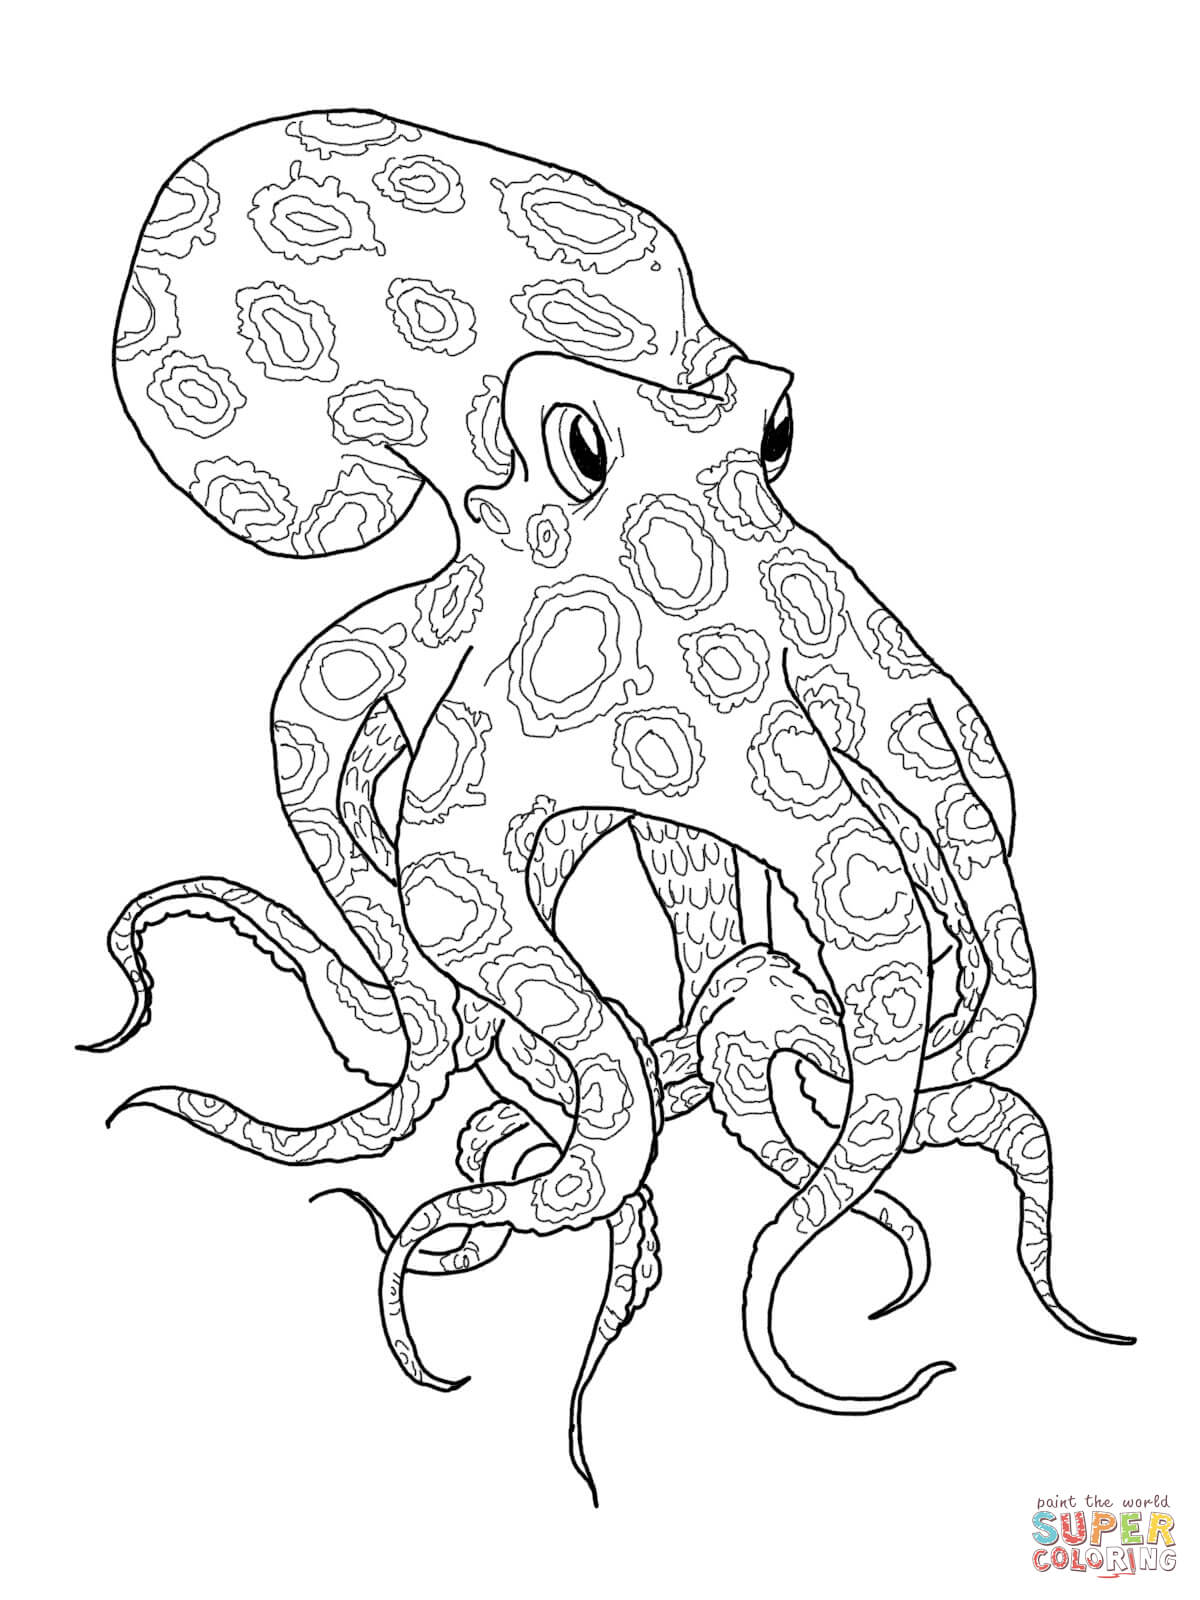 Octupus coloring #8, Download drawings